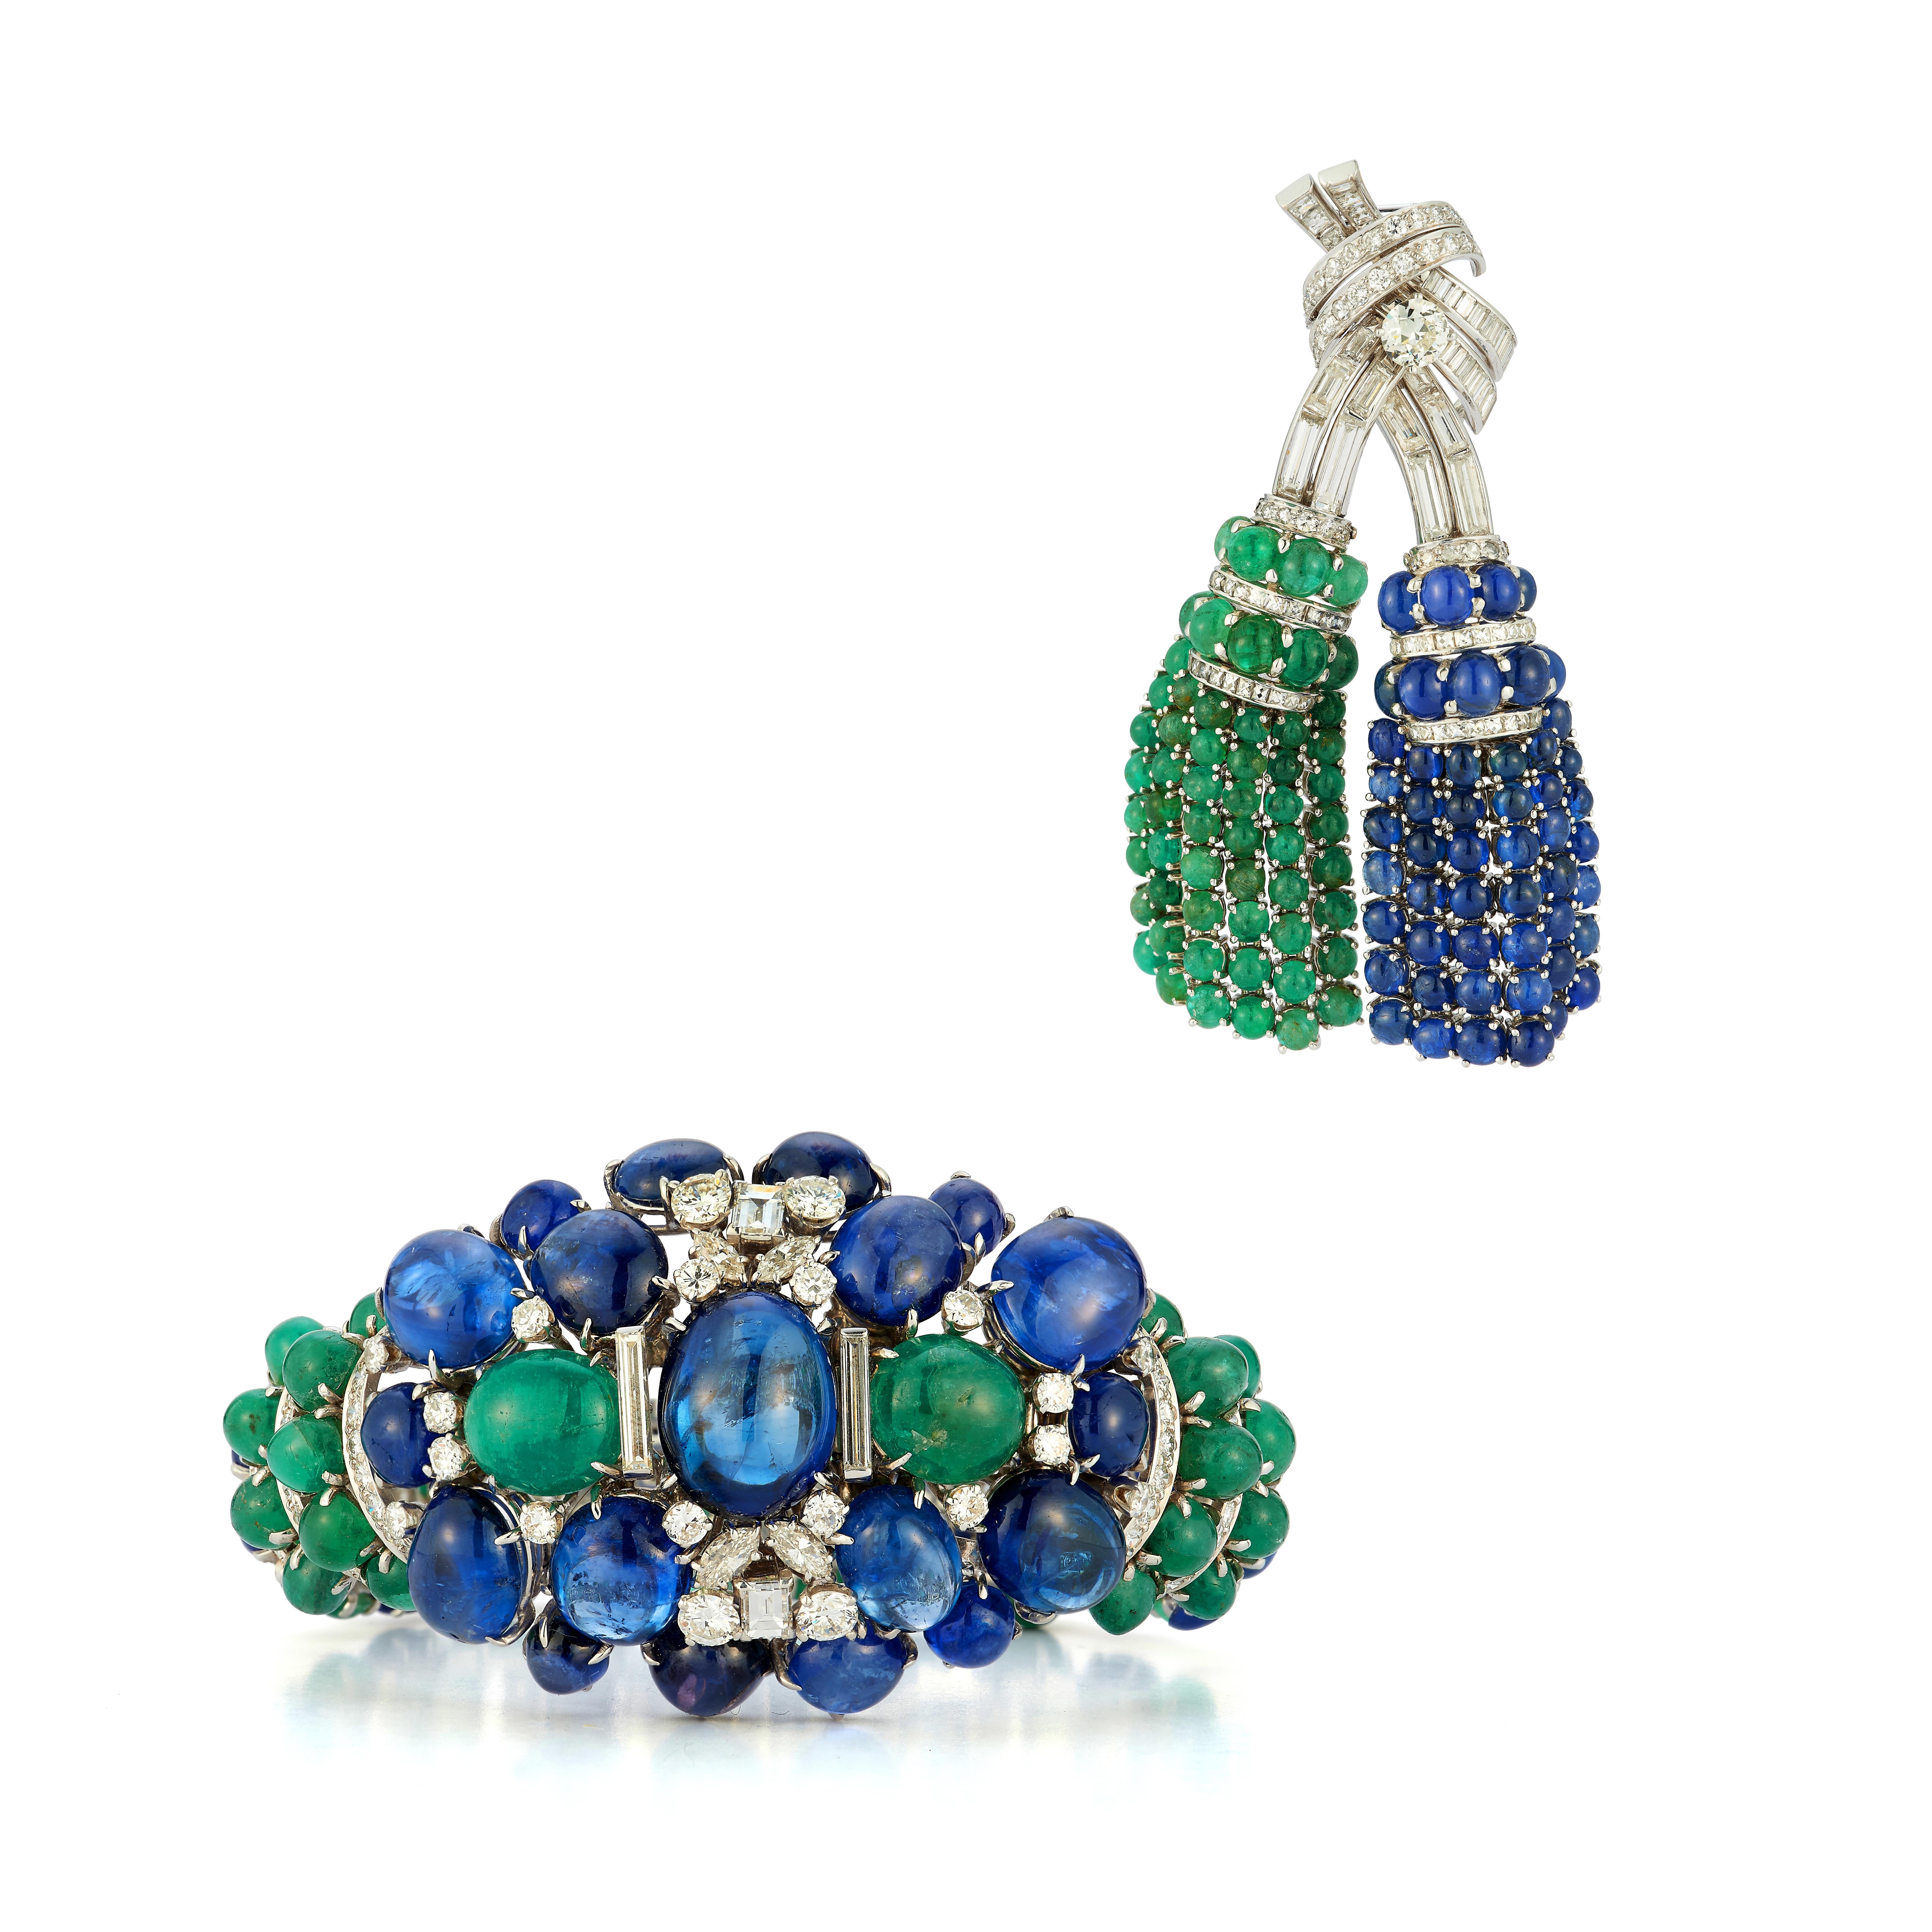 David Webb Sapphire & Emerald Bracelet & Brooch Set

Bracelet:
Made of platinum and 18 karat white gold set with 43 cabochon sapphires, the largest of which is approximately 20 carats, 44 cabochon emeralds, and 179 multi cut diamonds.

Signed David